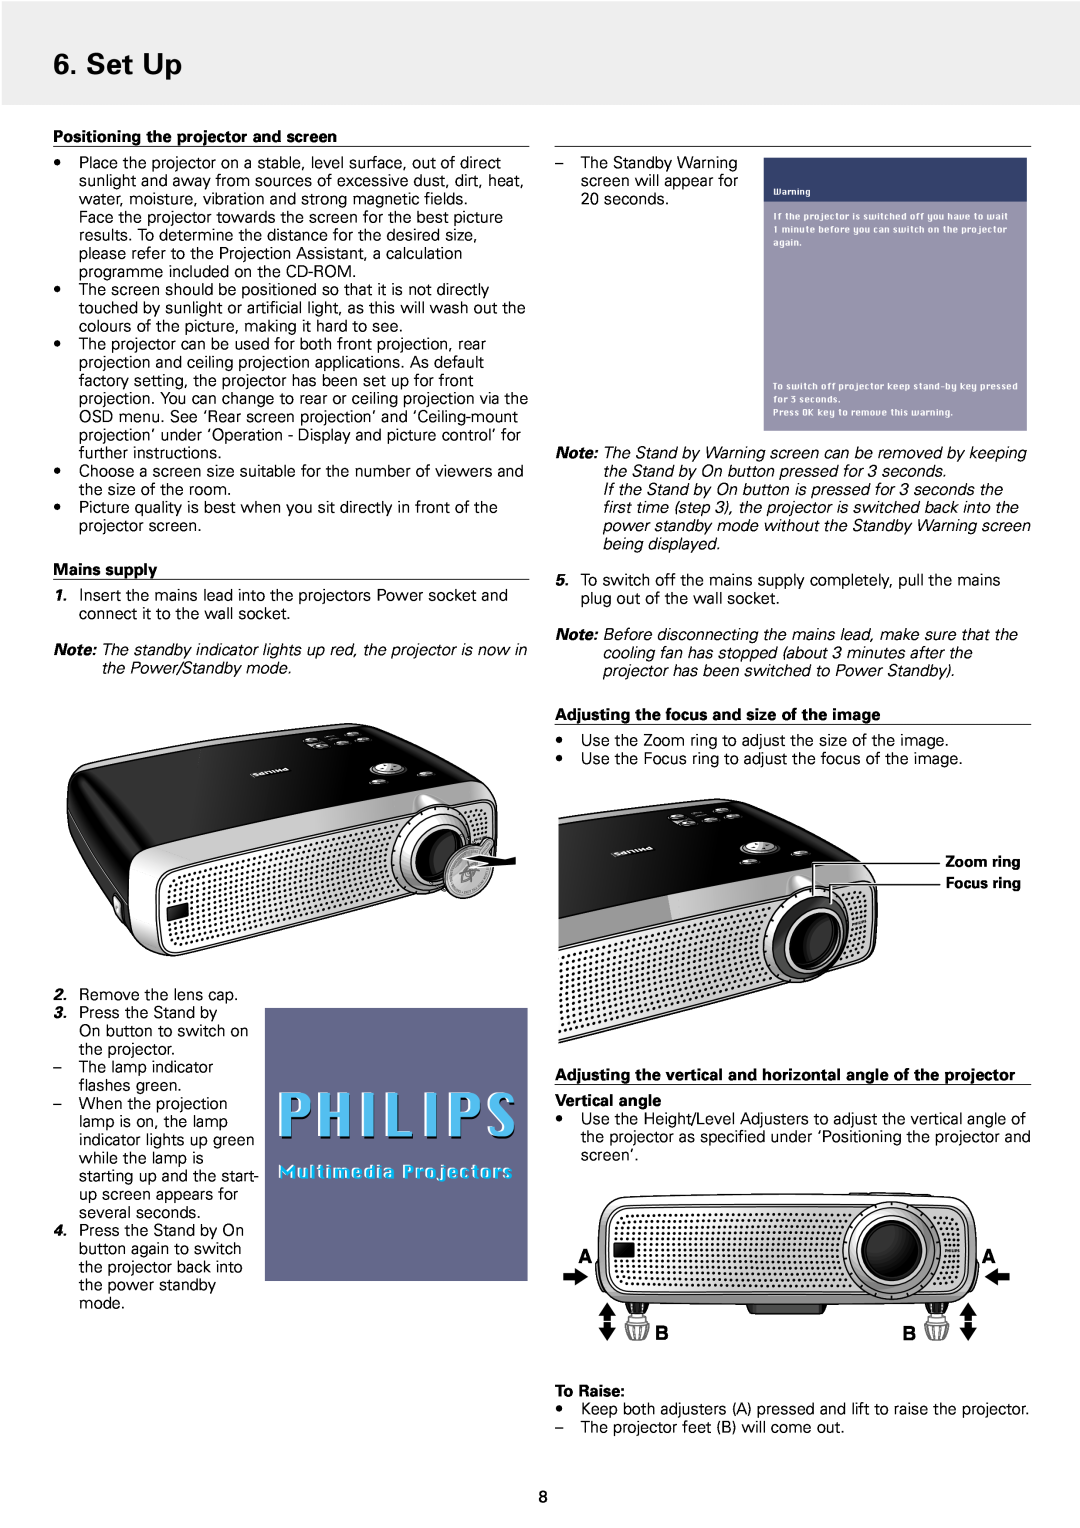 Philips 1 manual Set Up, Philips, Multimedia Projectors, Positioning the projector and screen, Mains supply, Vertical angle 